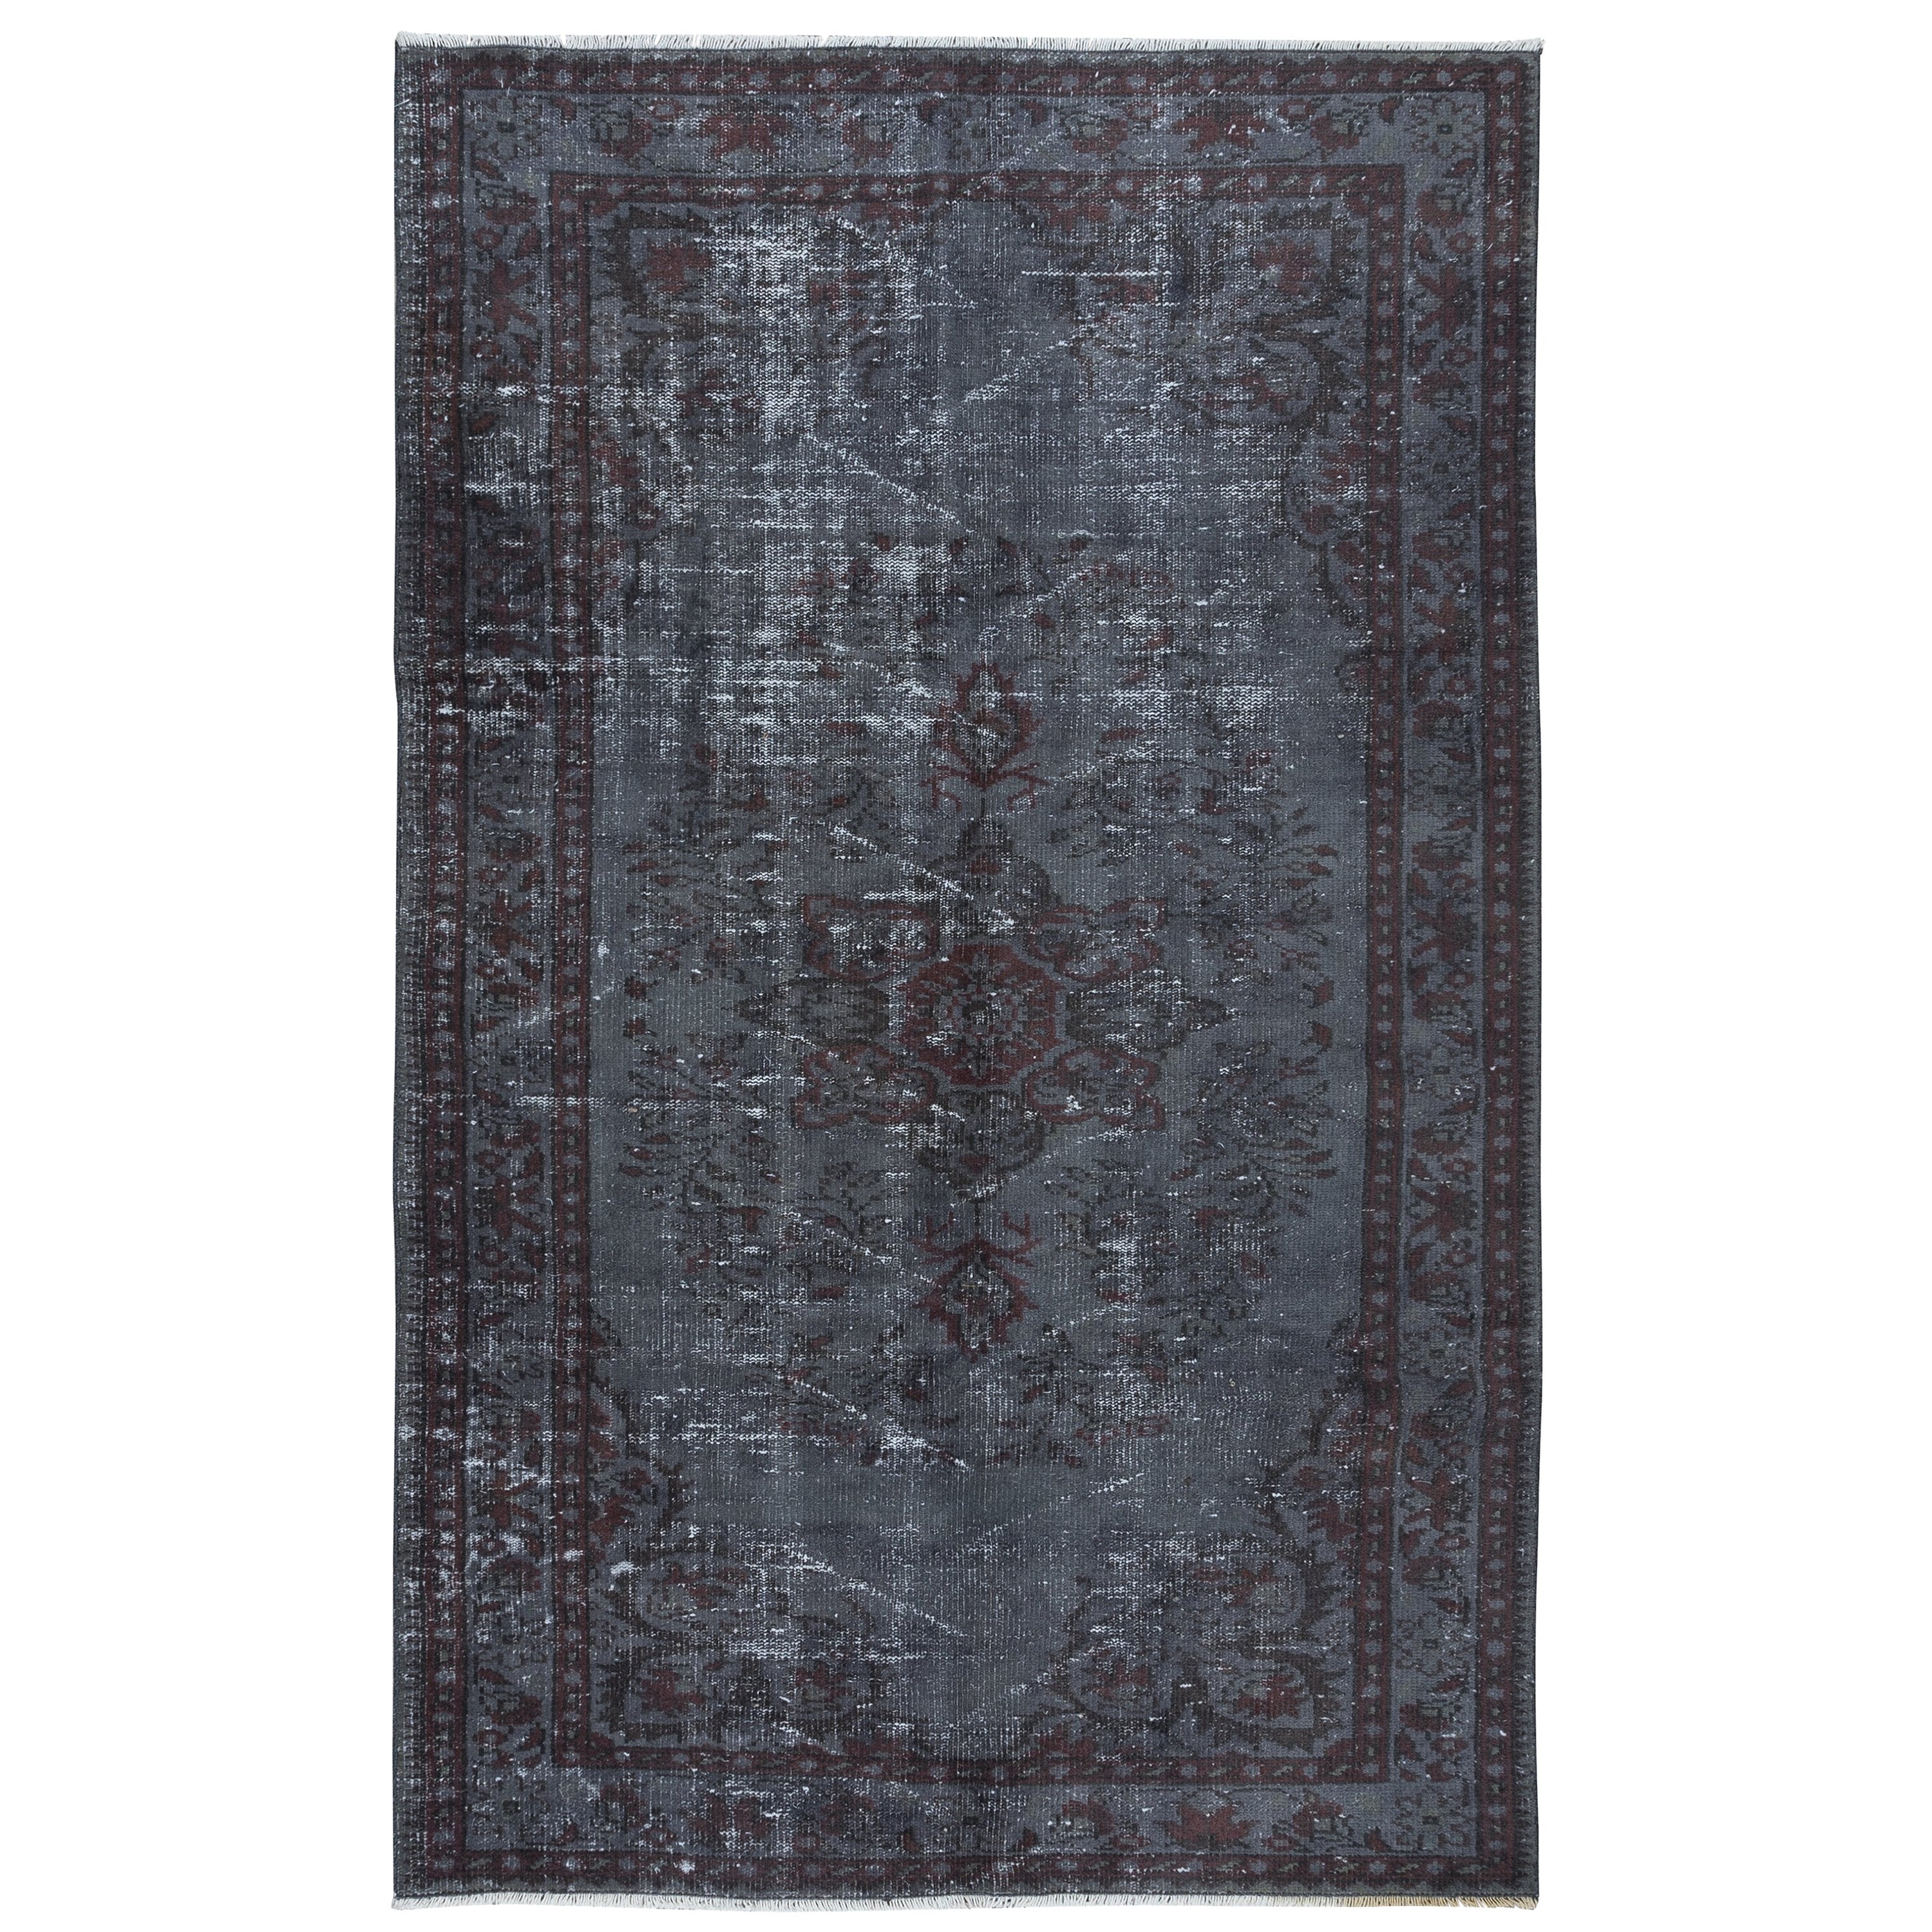 5.4x8.4 Ft Modern Handmade Turkish Area Rug in Maroon Red & Gray for Living Room For Sale